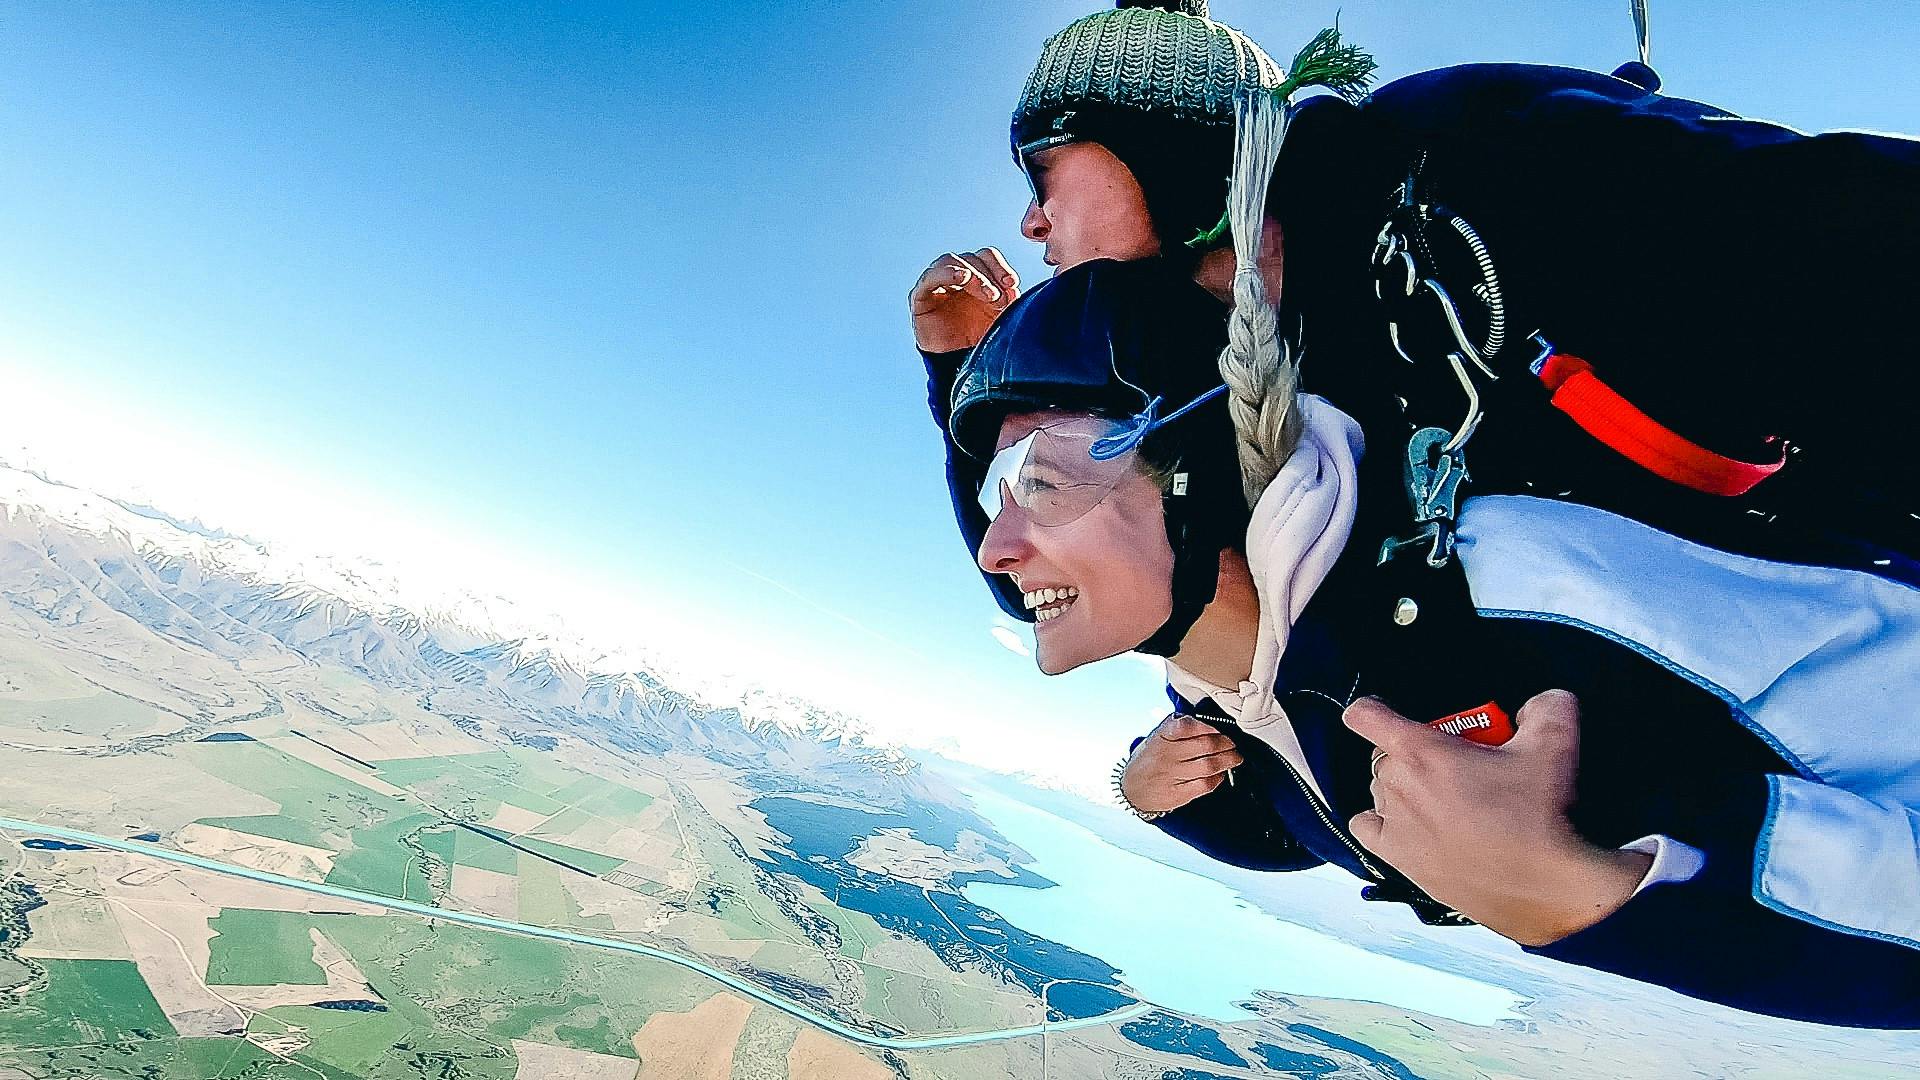 Skydive Mt Cook - NZ's Most Spectacular Skydive (106).jpg